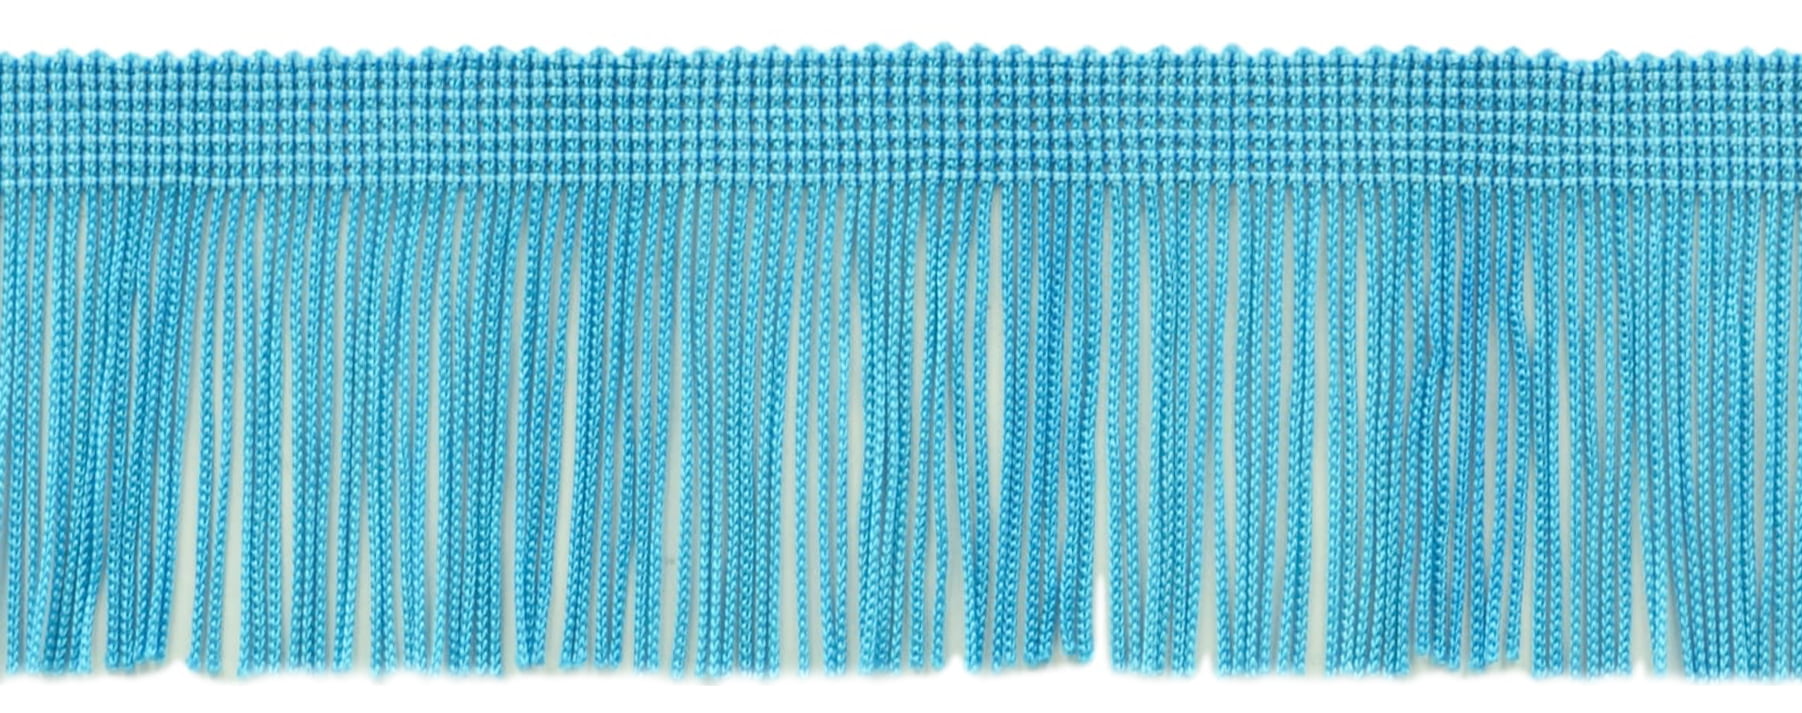 04 Sold by The Yard CFS04 Color: Turquoise 4 Inch Chainette Sequin Fringe Trim